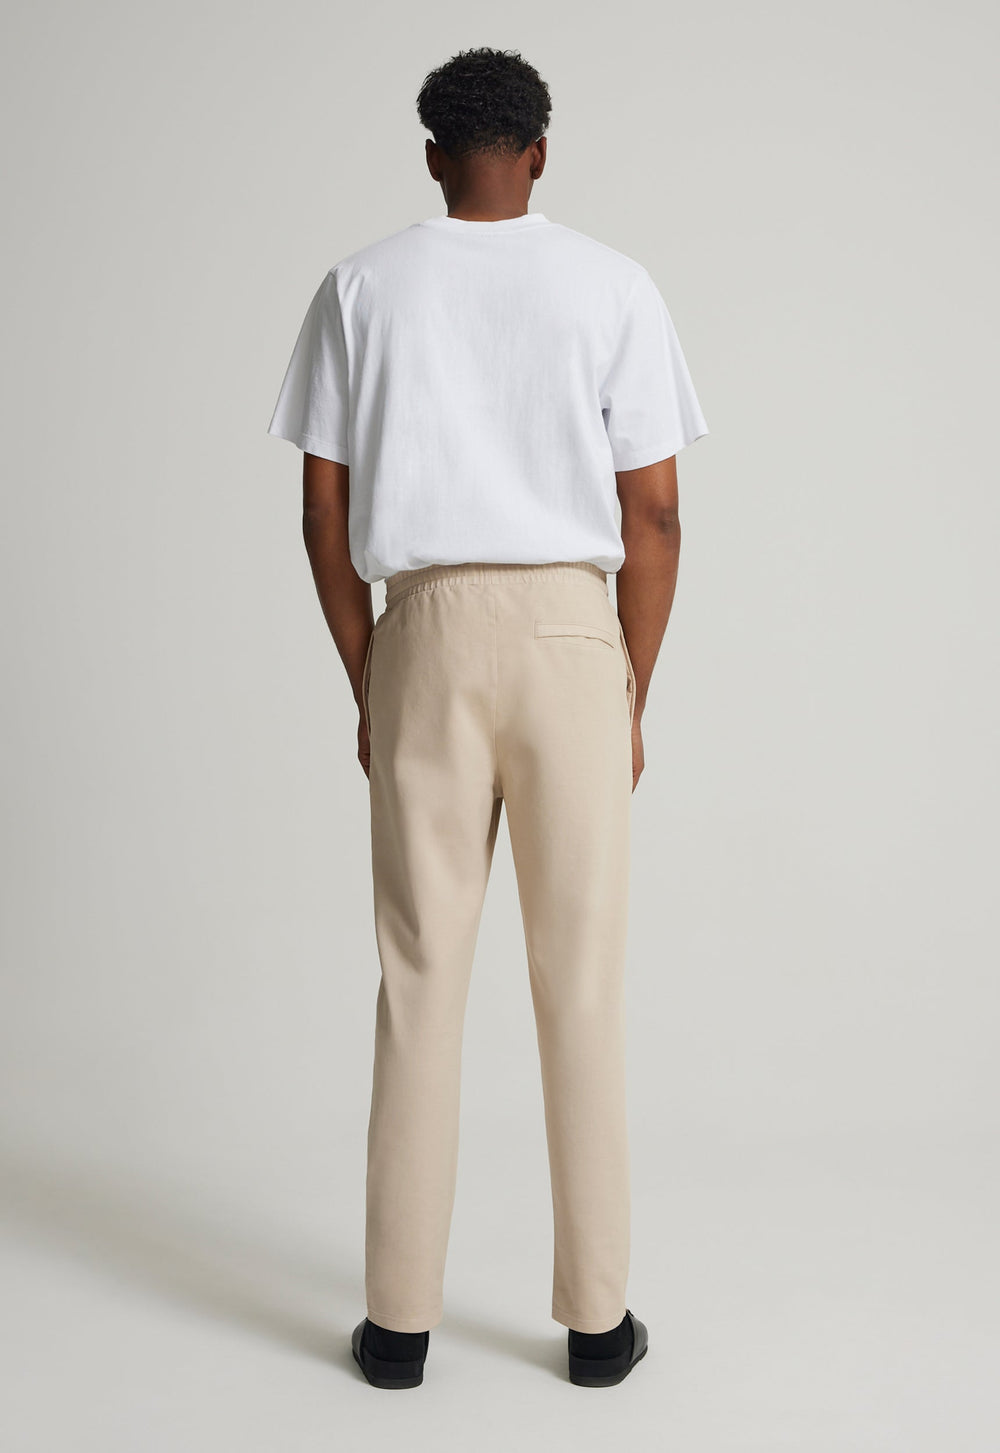 Jac+Jack IRI COTTON PANT in Canas